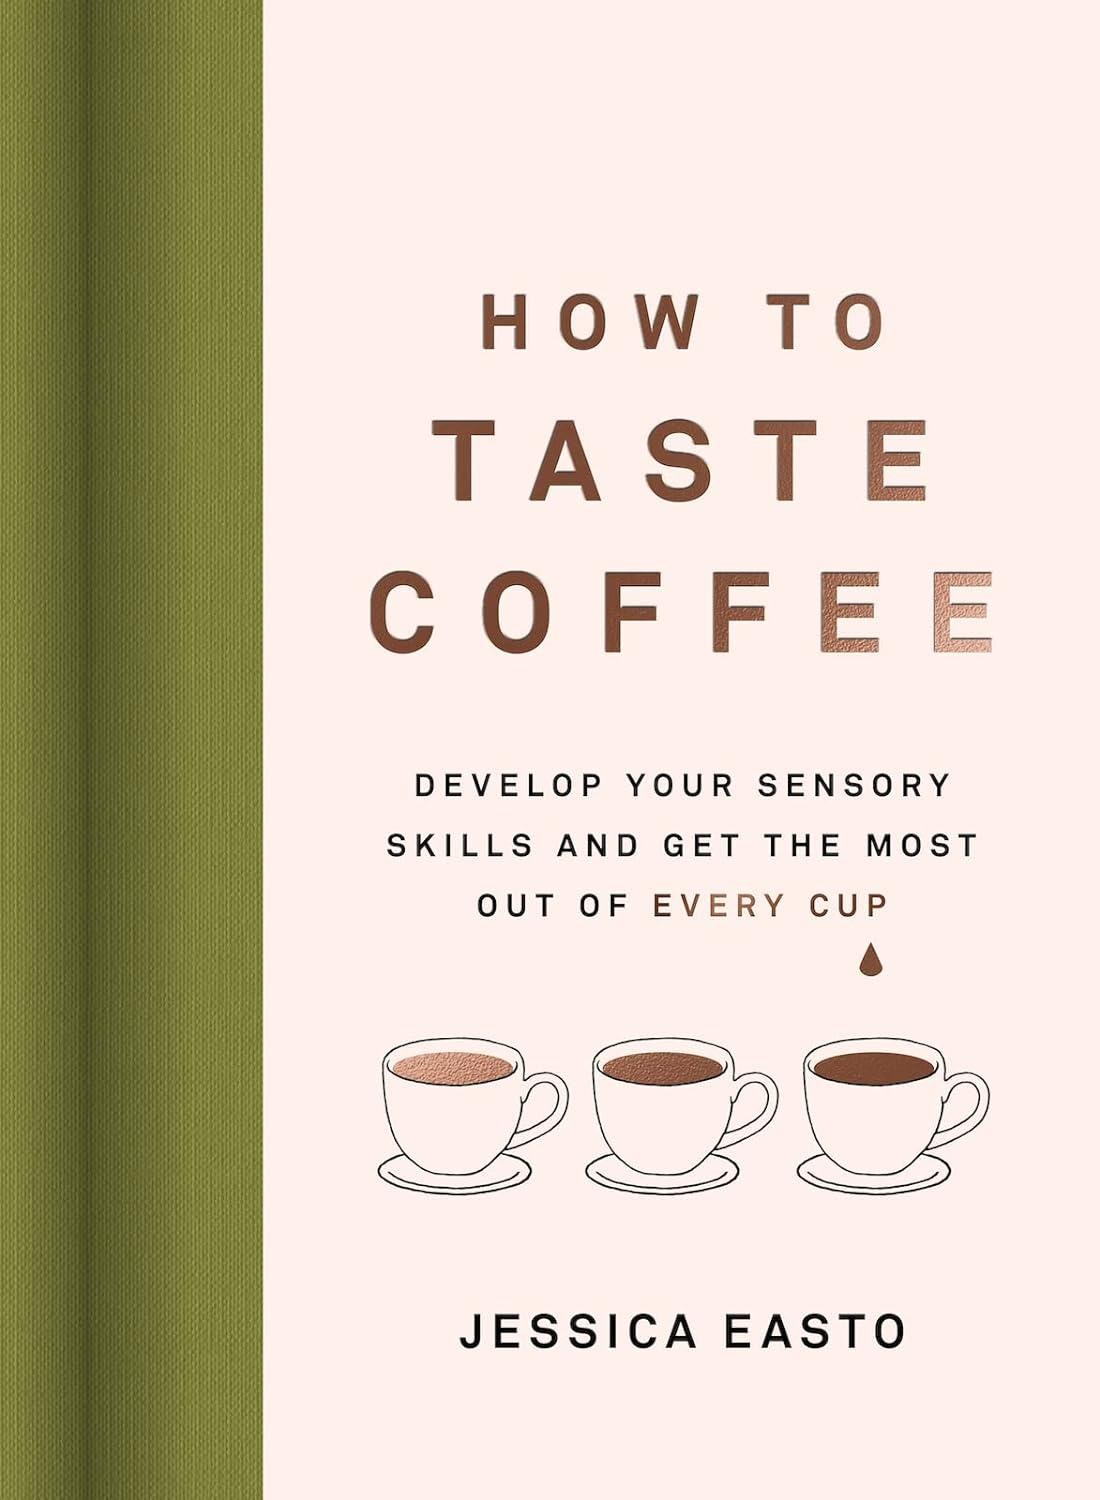 ING How to taste coffee